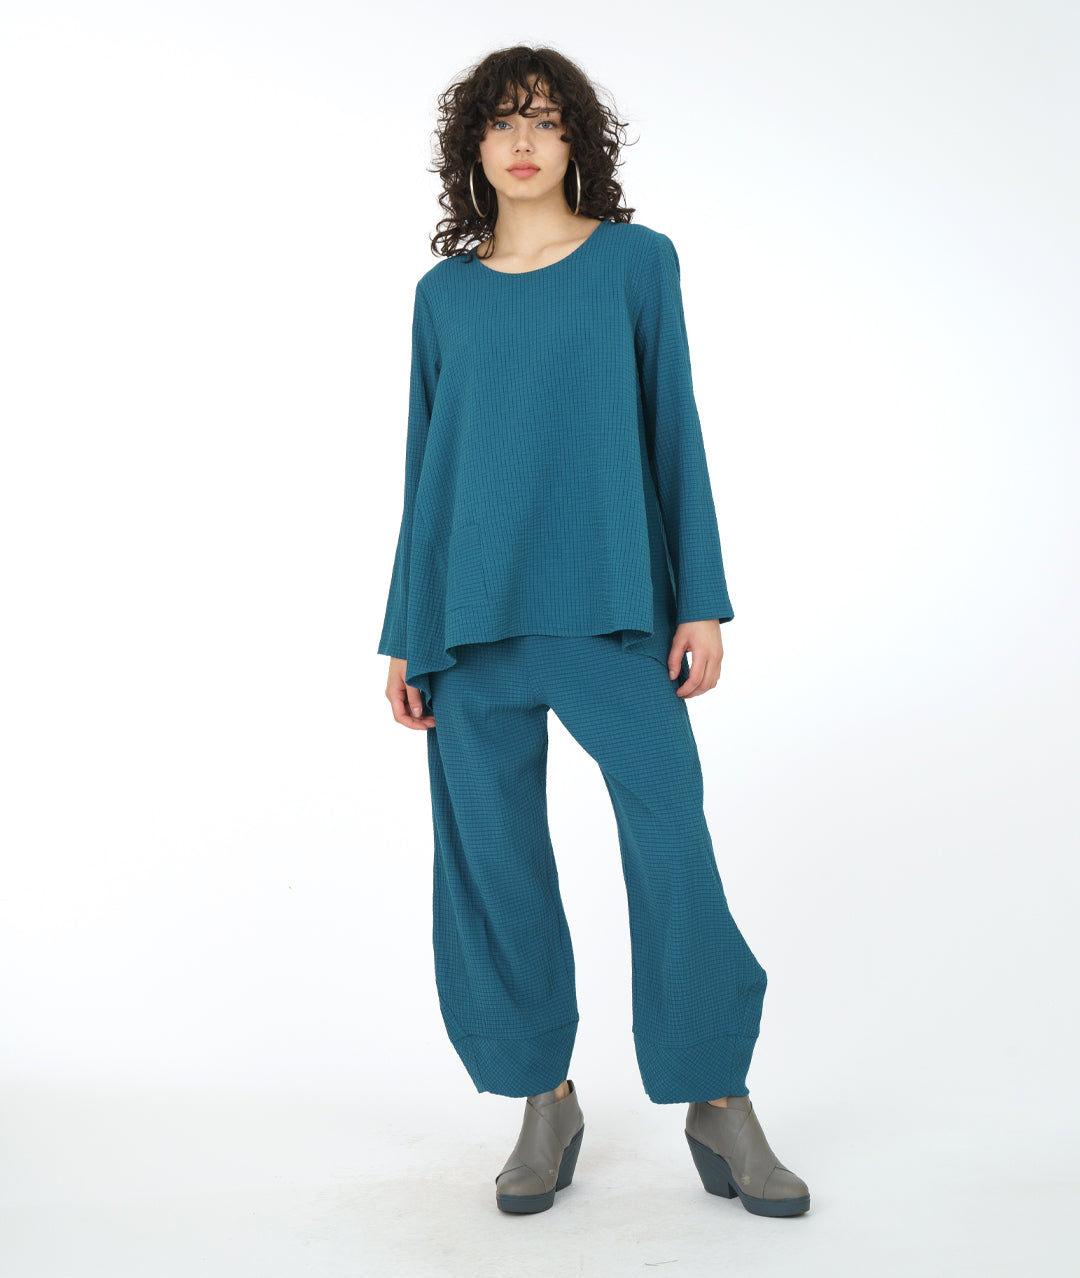 model in a teal flowy top with a matching textured pant with pockets, an elastic waistband, and a tapered cuff at the bottom hem